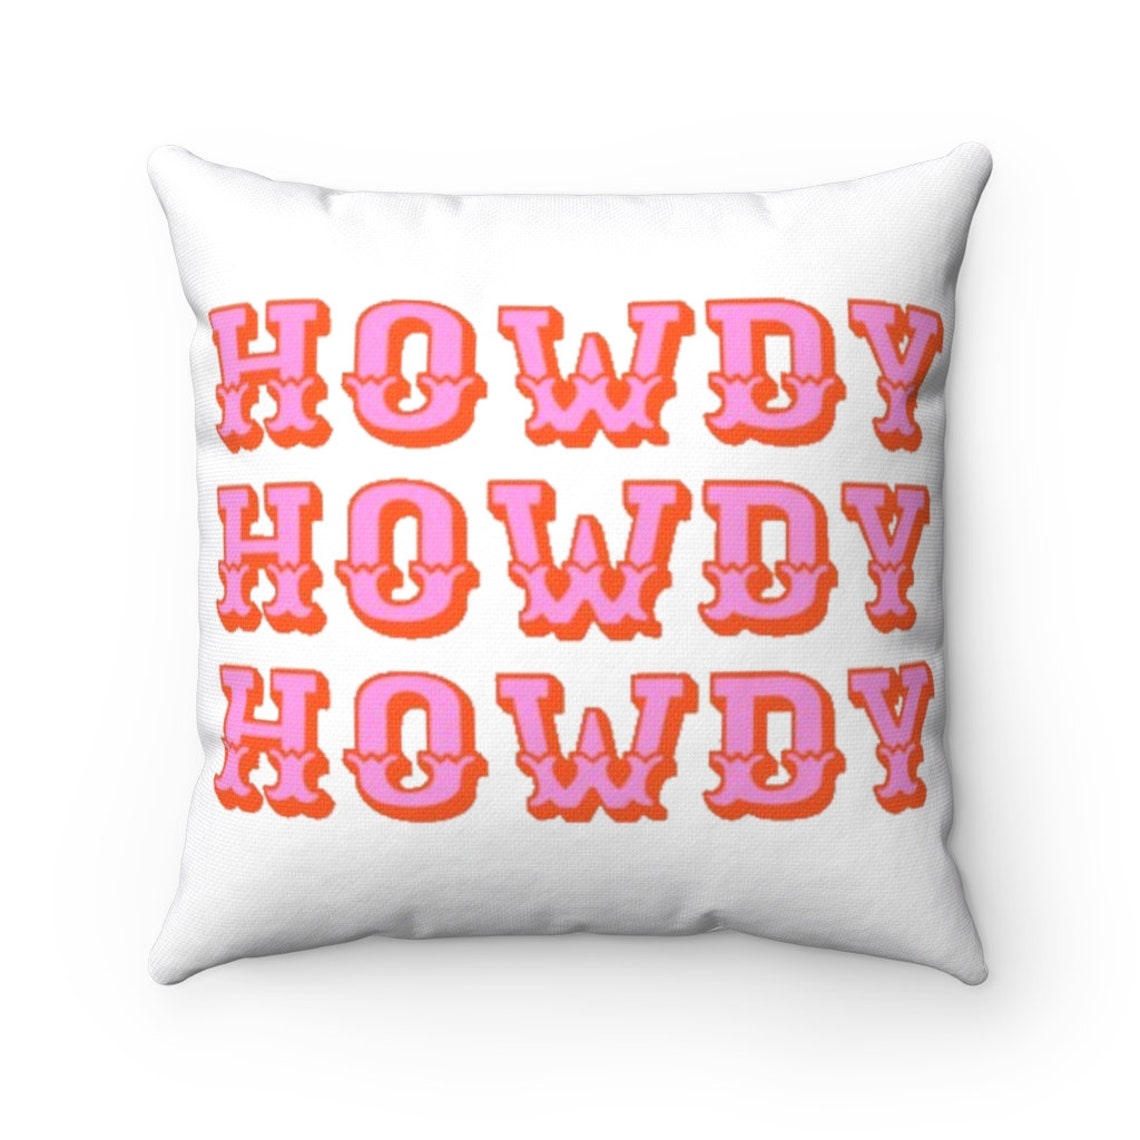 Howdy howdy howdy western cowgirl Spun Polyester Square Pillow | Etsy